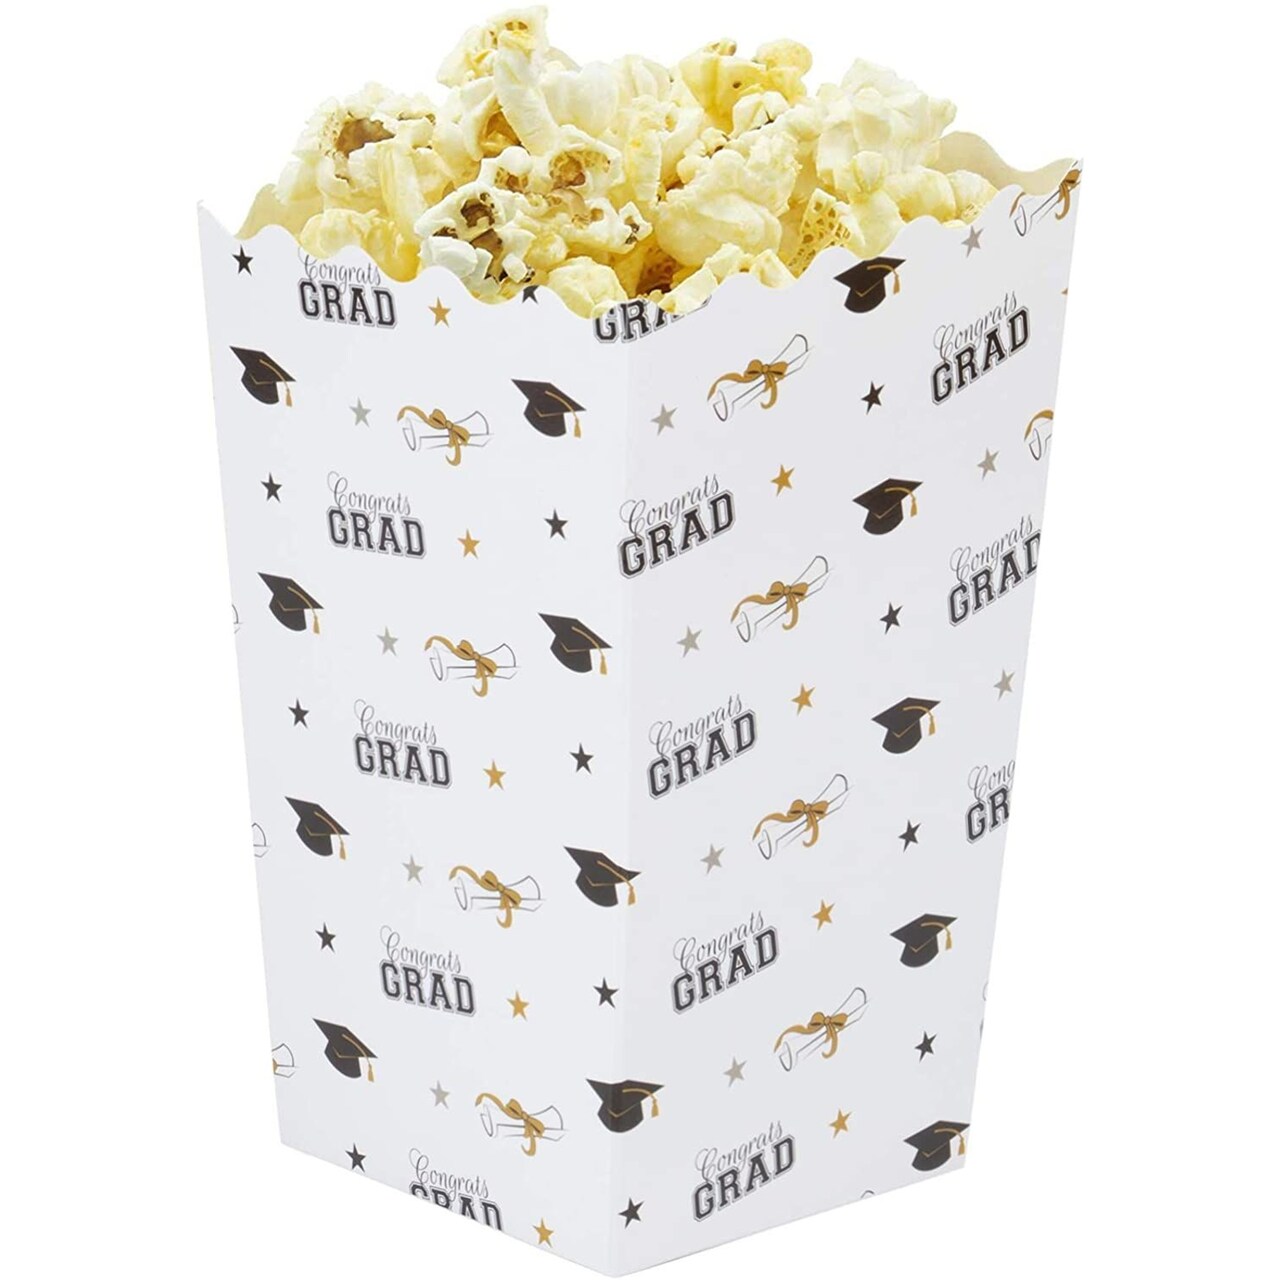 100 Pack Small Popcorn Party Favor Boxes, Class of 2024 Graduation Decor and Supplies, 3.3 x 5.5 in